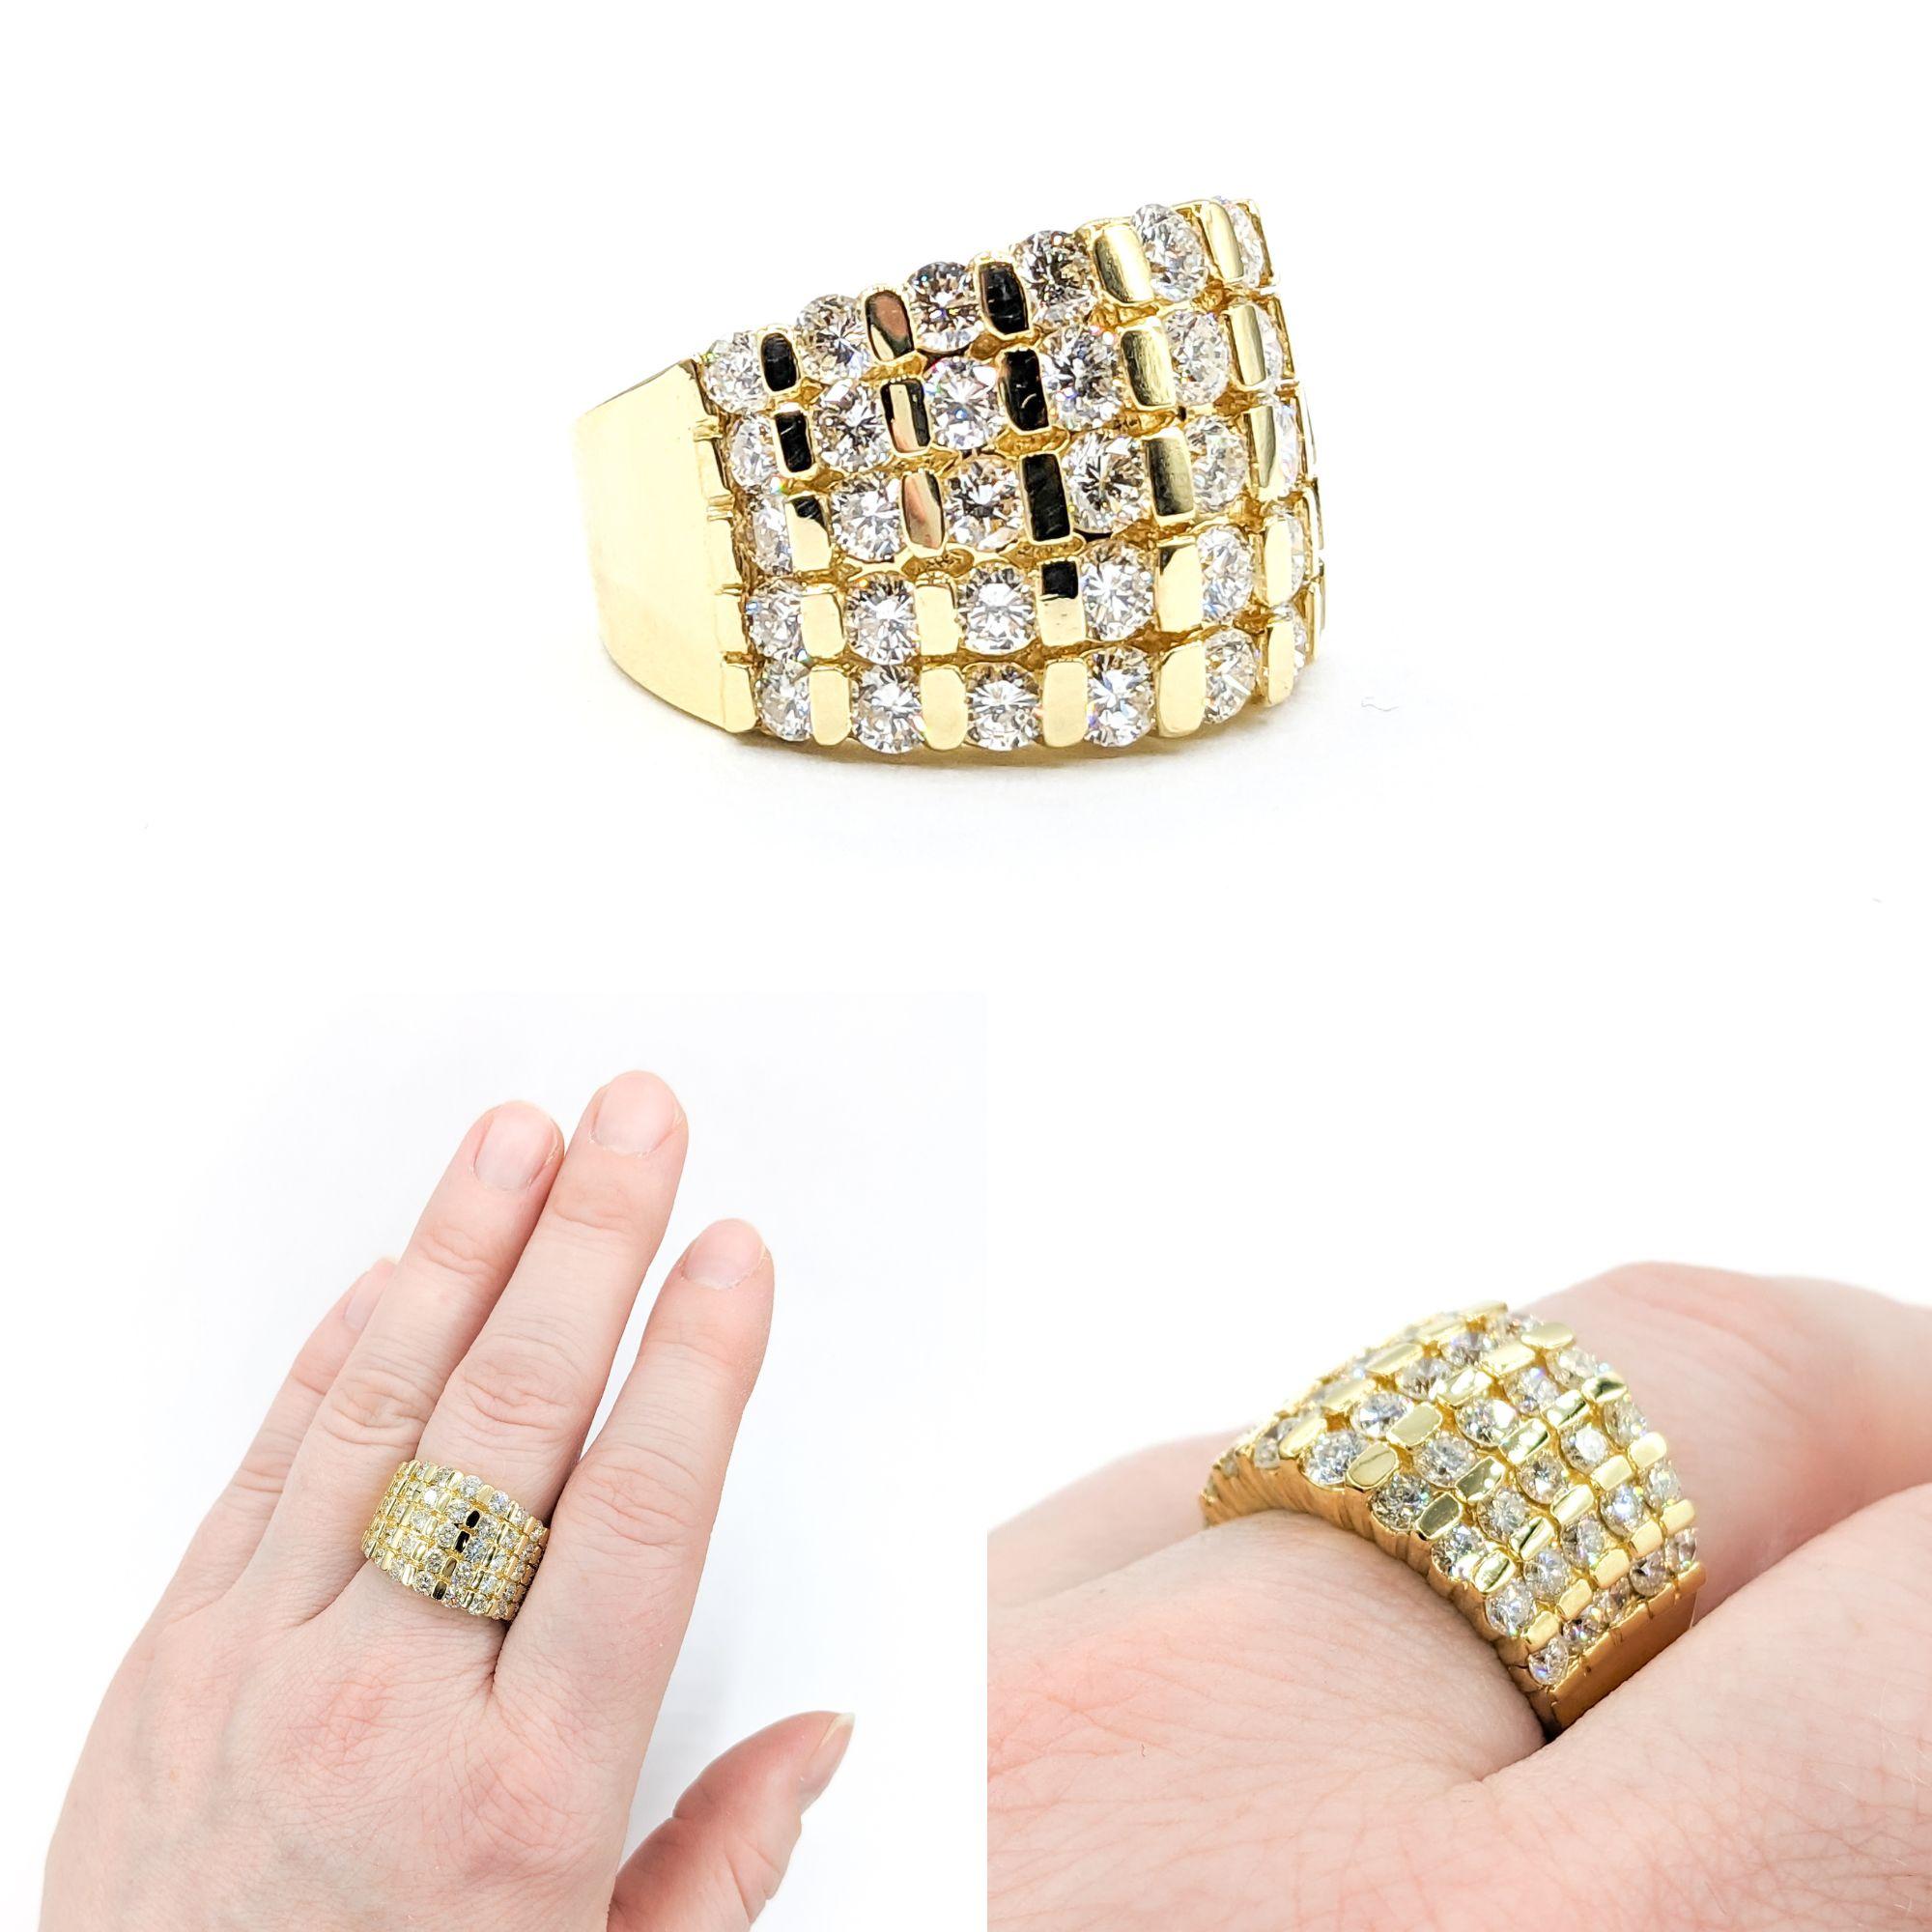 3.40ctw Diamond 9-Row Ring In Yellow Gold

This stunning Diamond Fashion Ring, meticulously crafted in 14kt yellow gold, boasts an impressive 3.40ctw of diamonds set in a 9-row bar arrangement. These diamonds, of SI clarity and a near colorless